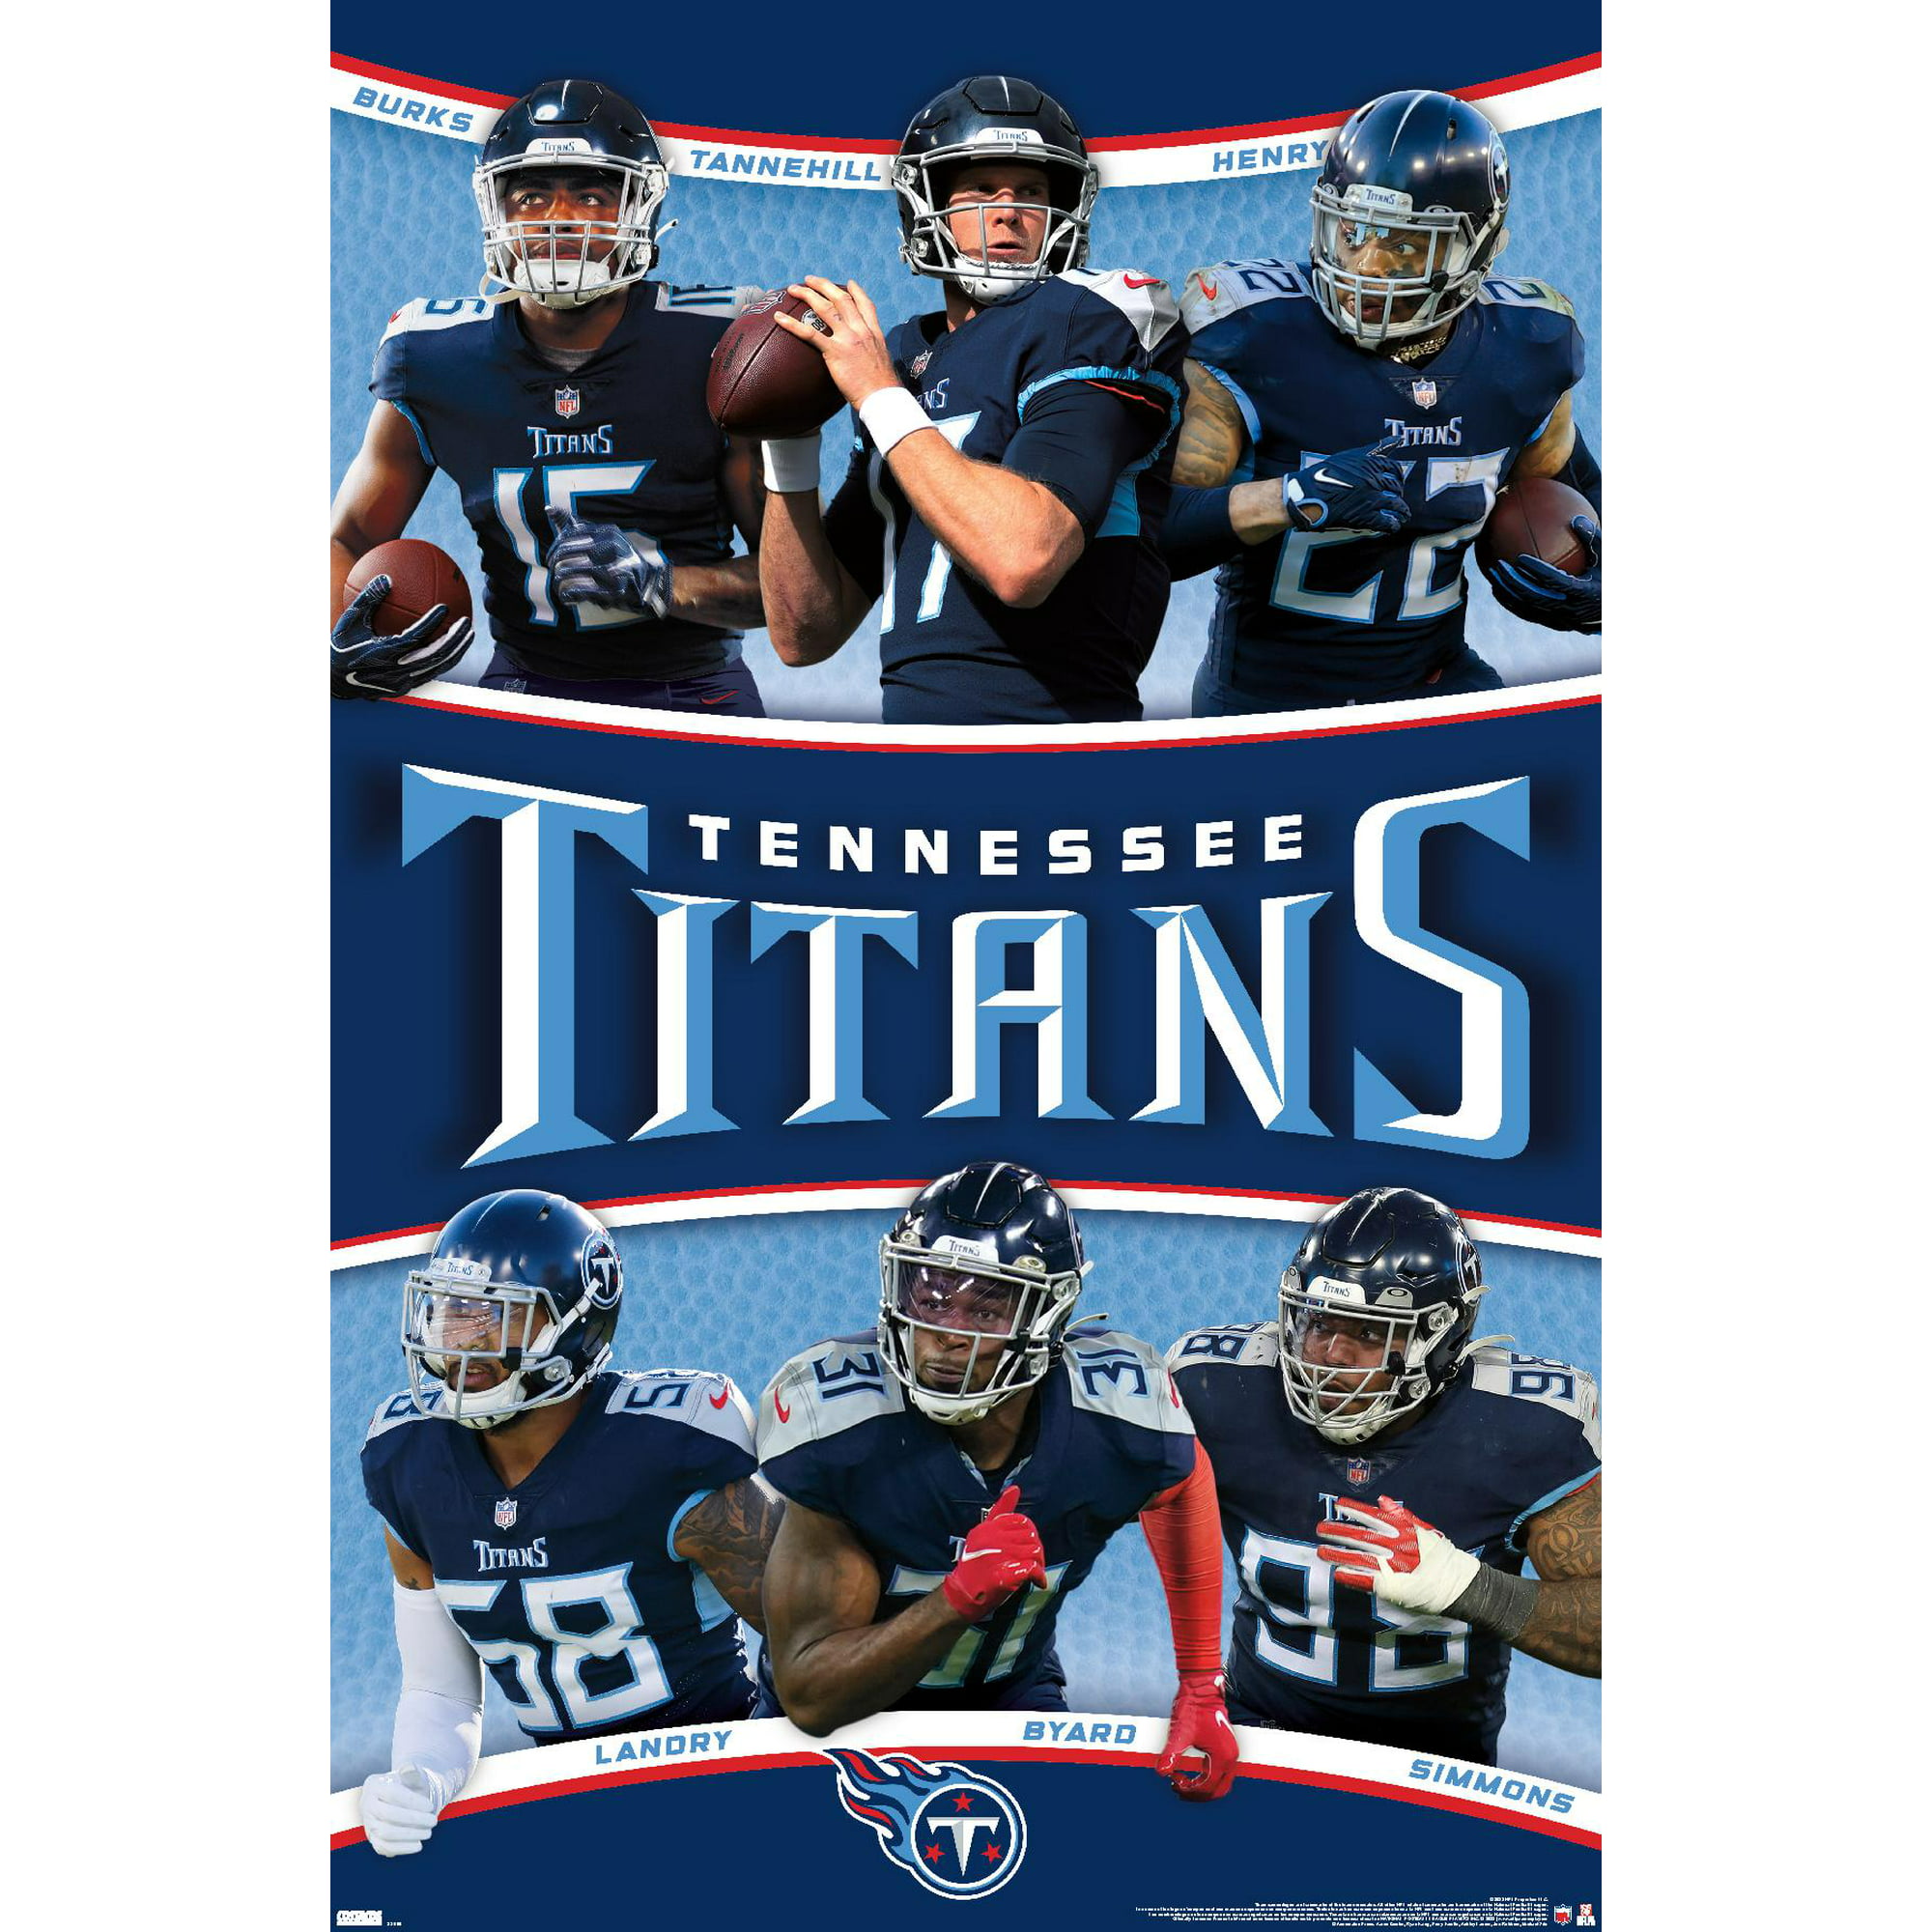 NFL Tennessee Titans - Team 22 Wall Poster, 22.375' x 34'